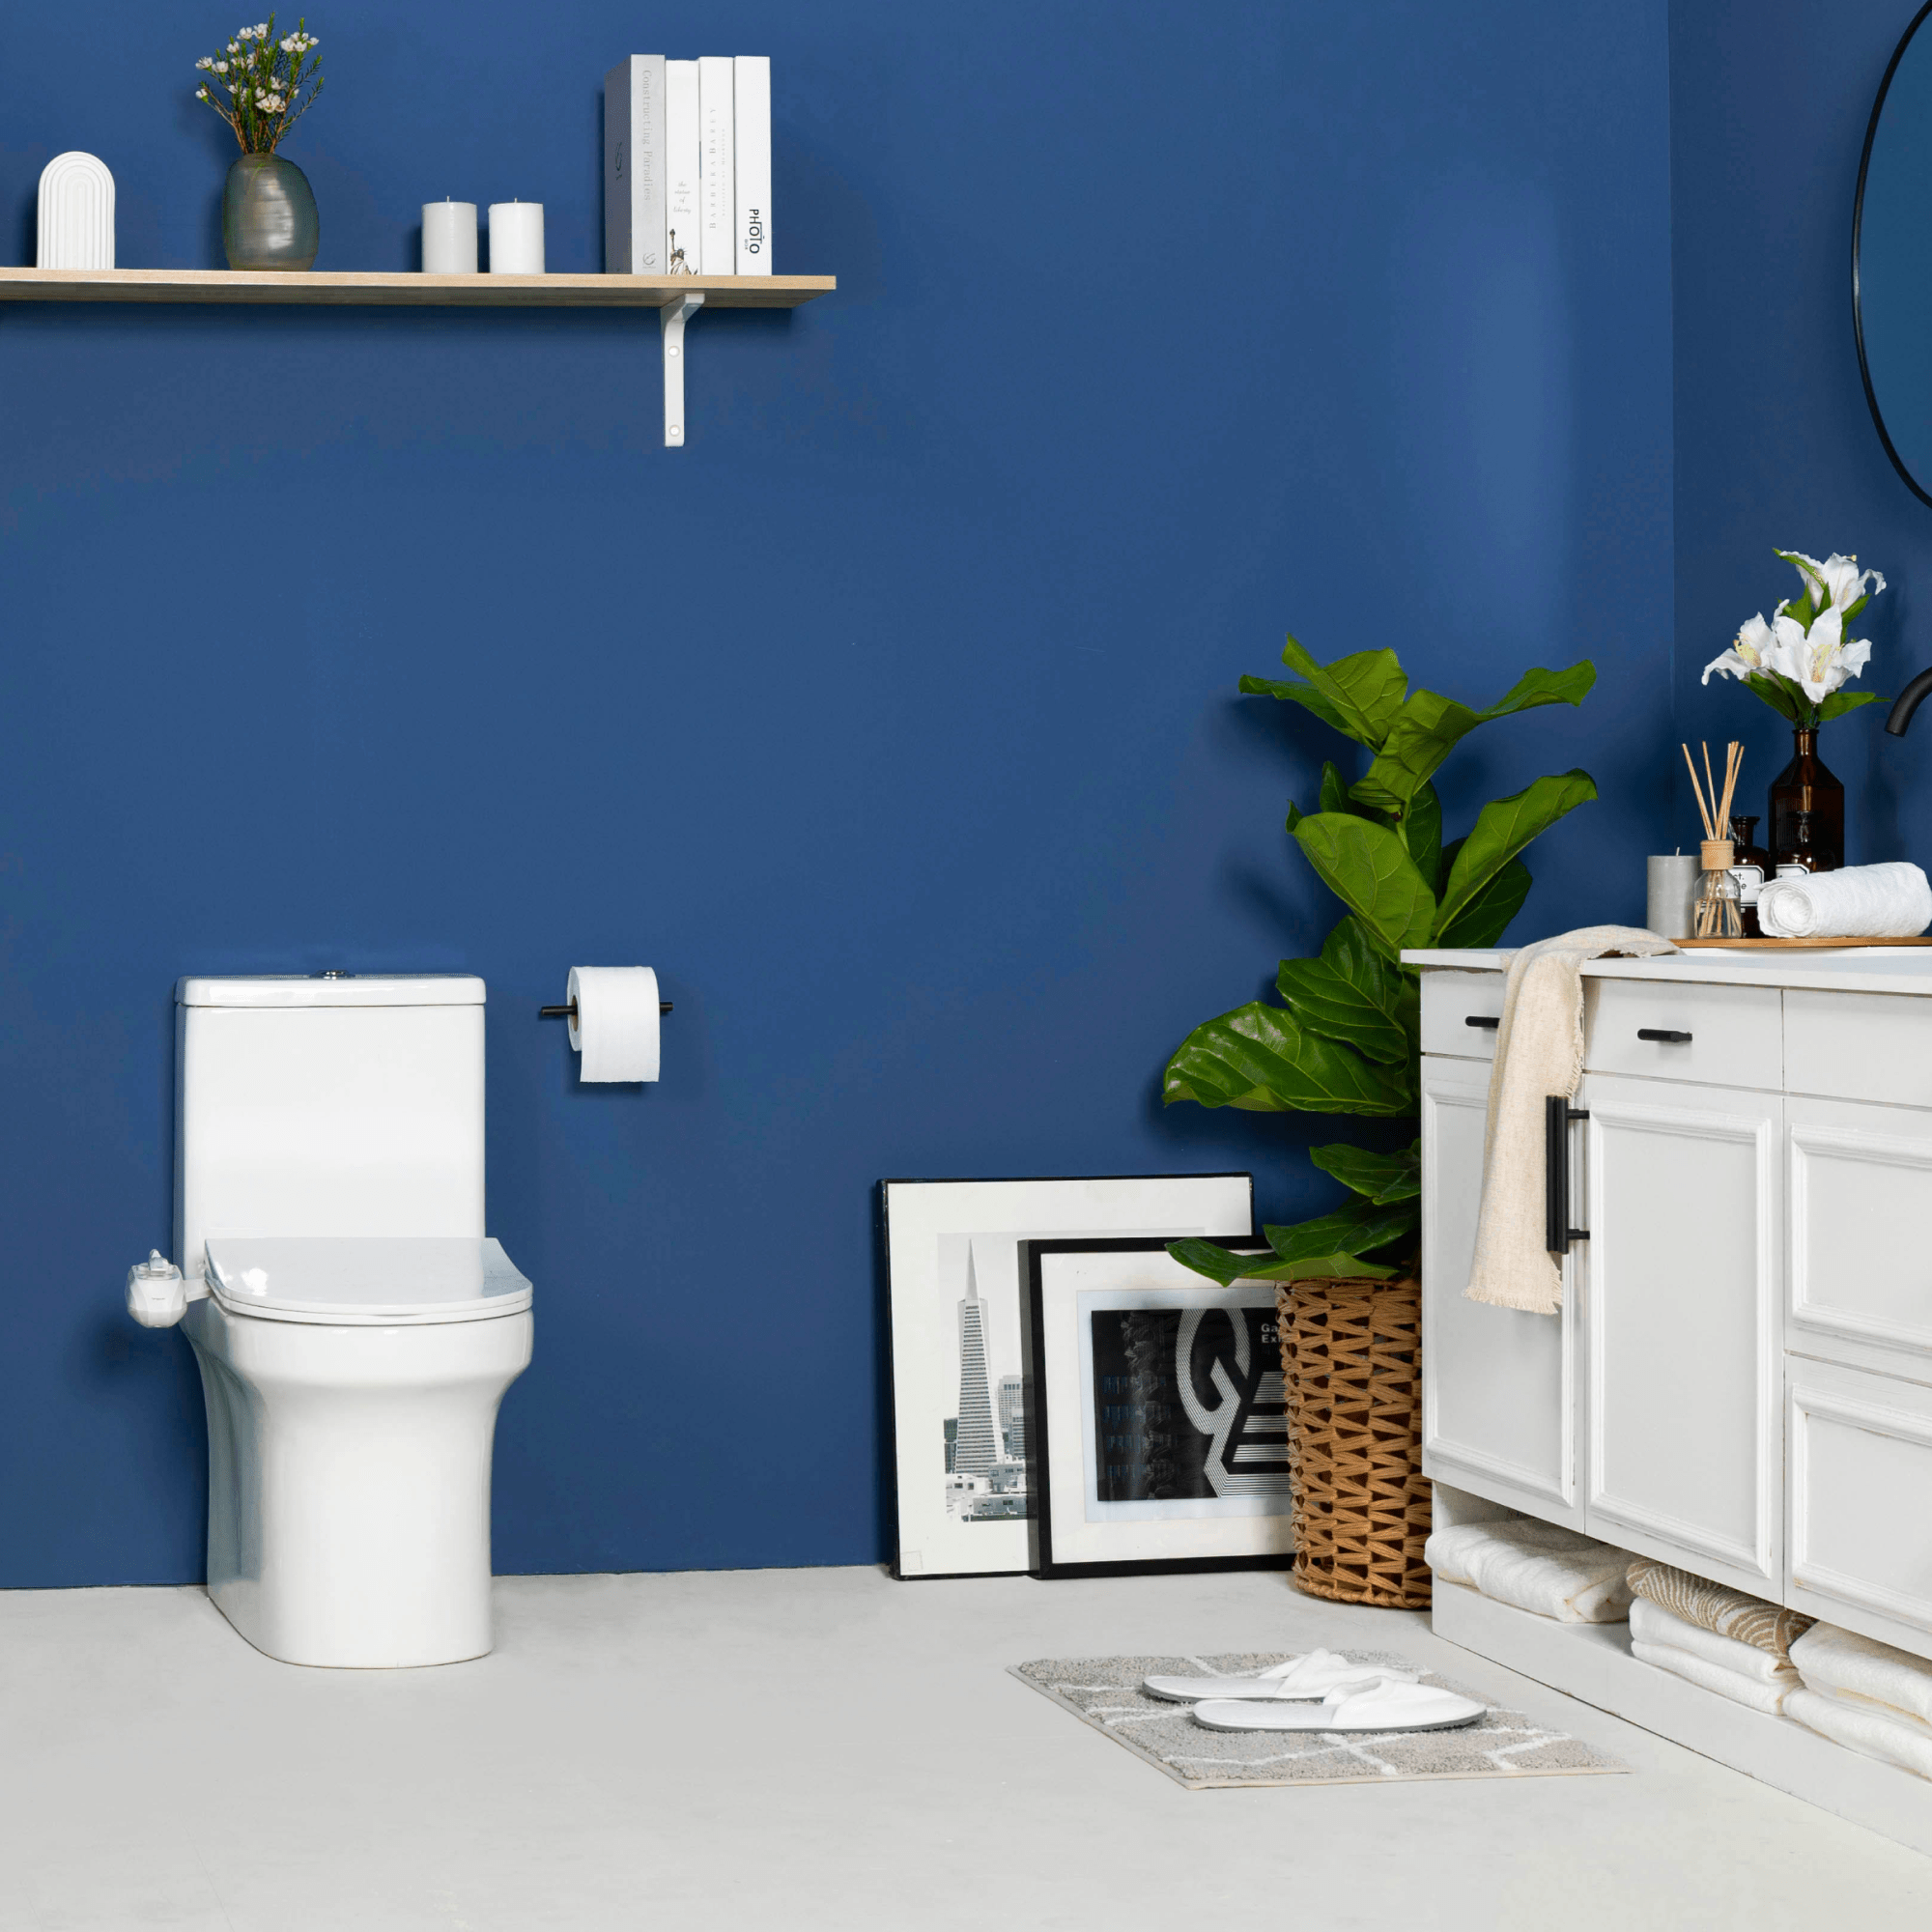 NEO 320 Plus White installed on a toilet, in a modern blue bathroom with a cabinet, paintings, and a plant